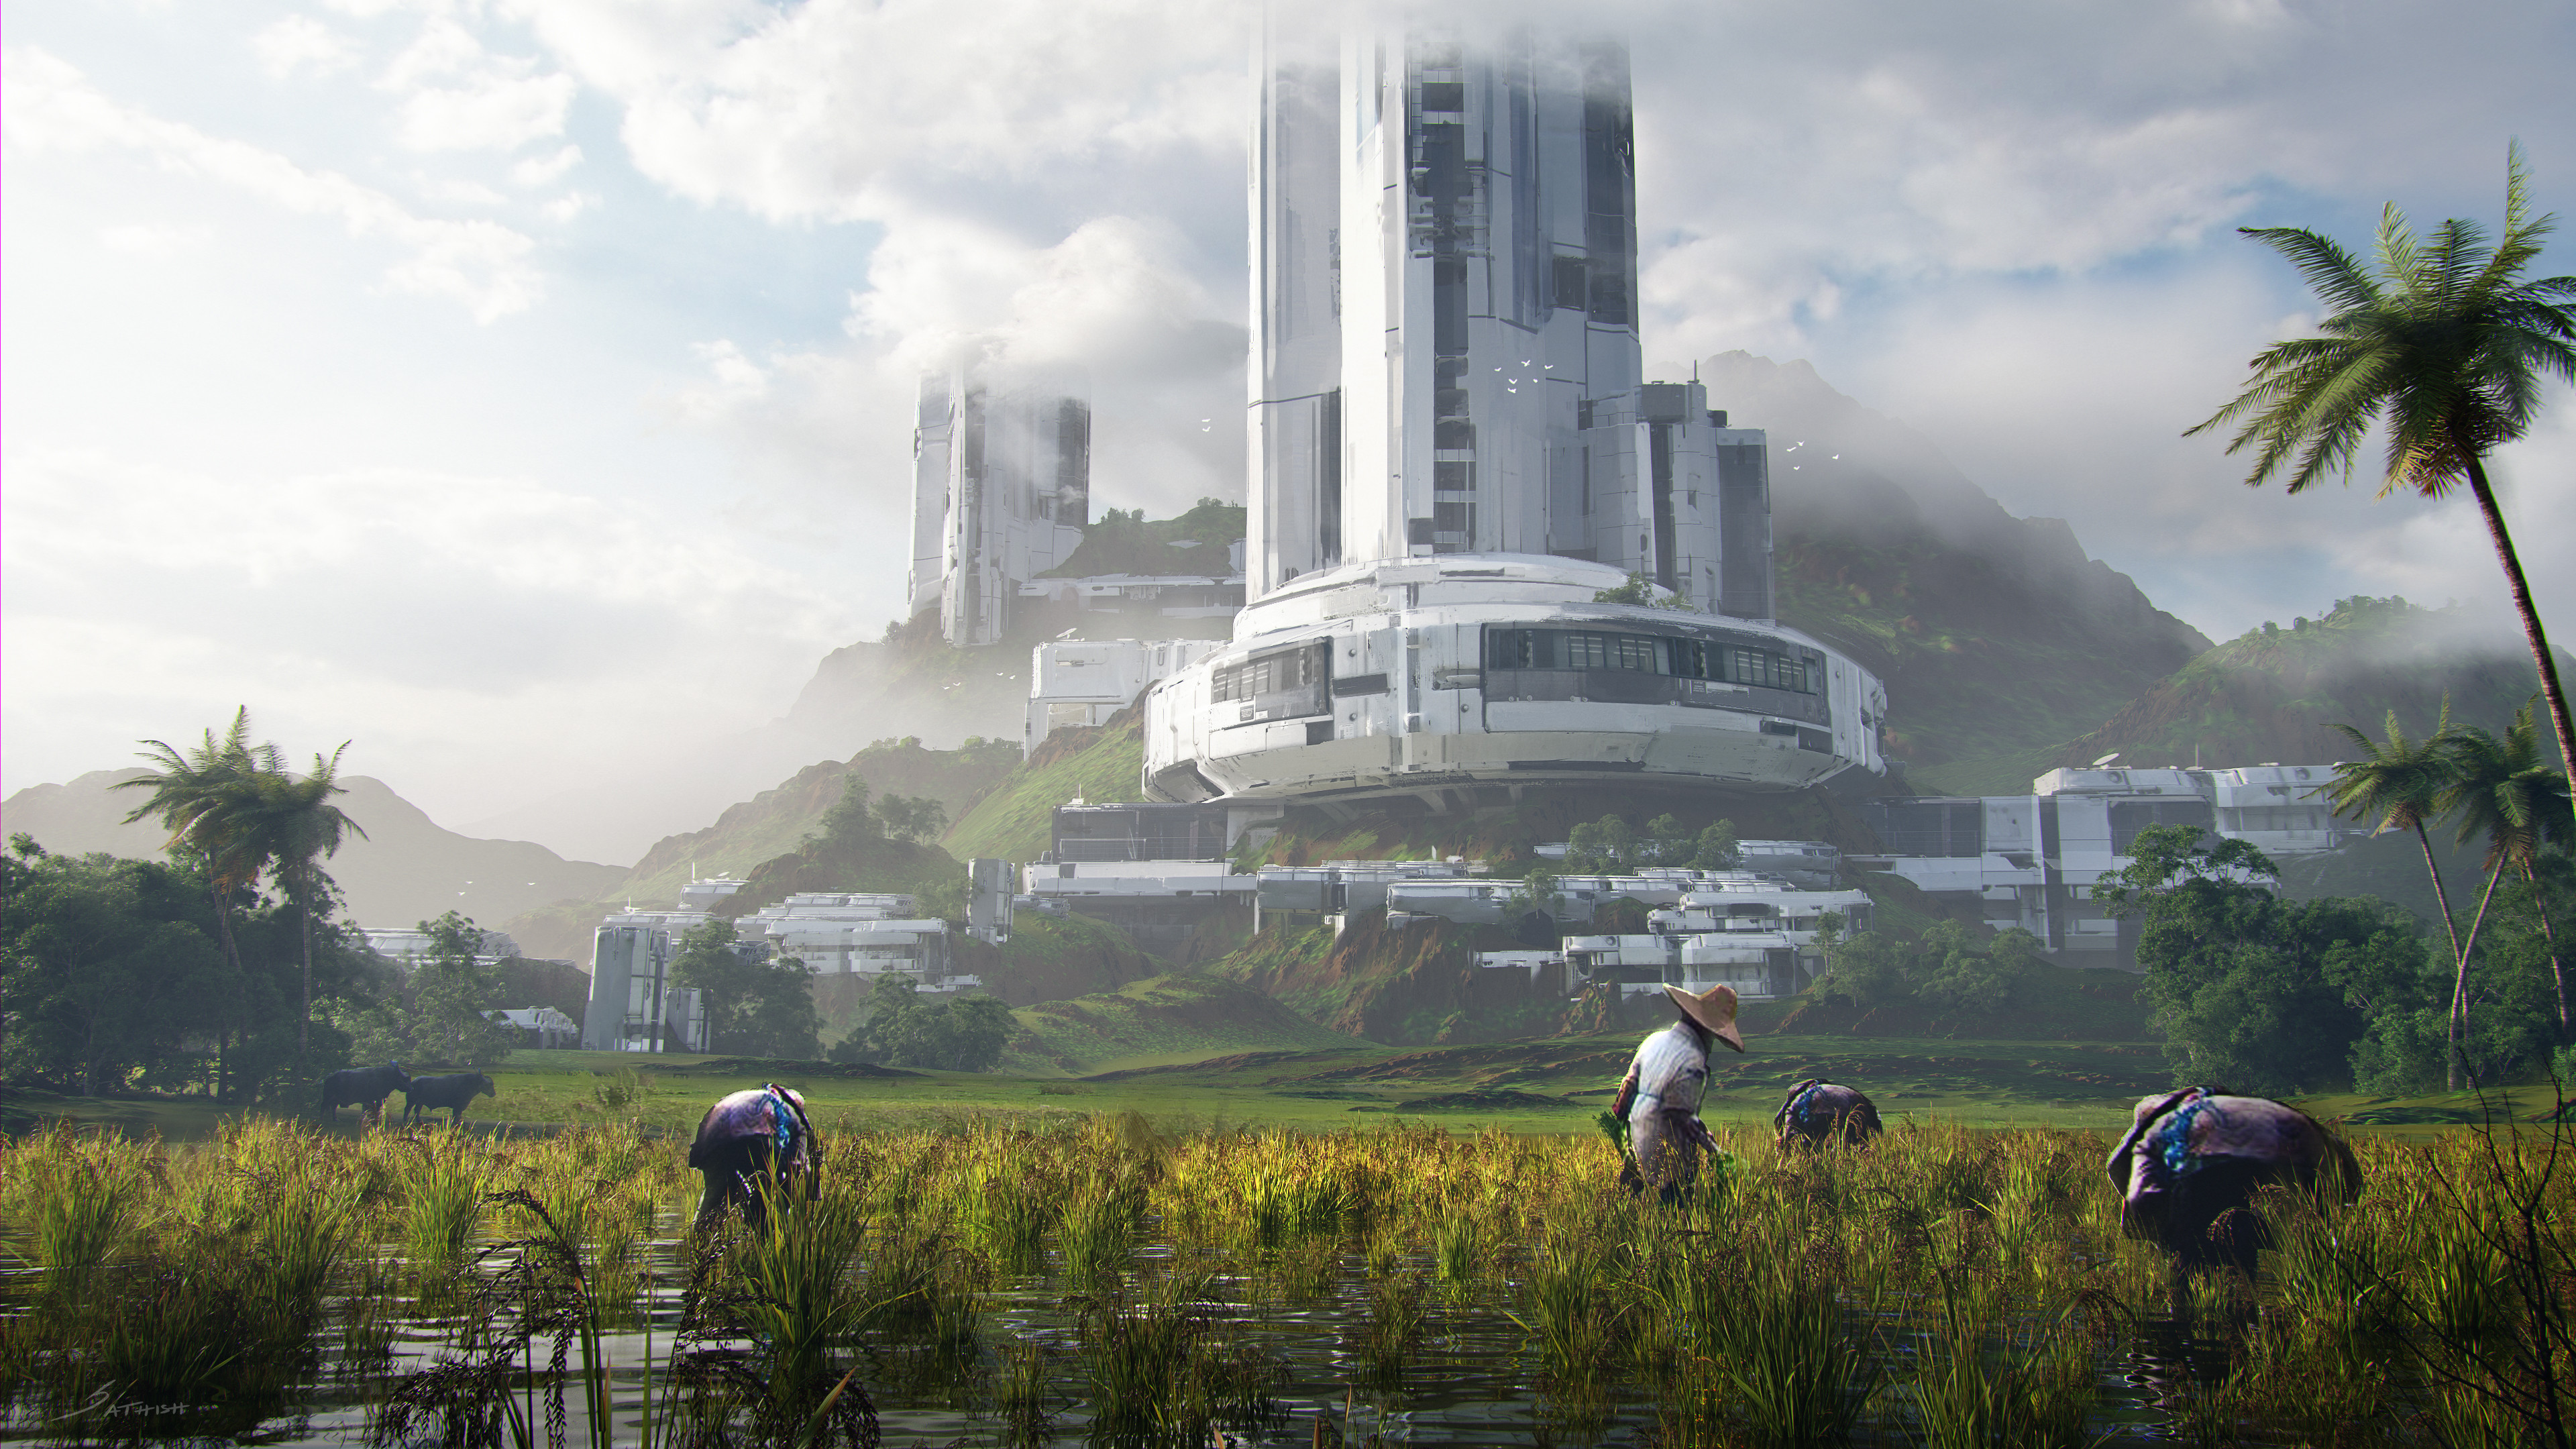 A rice field in the city of the future